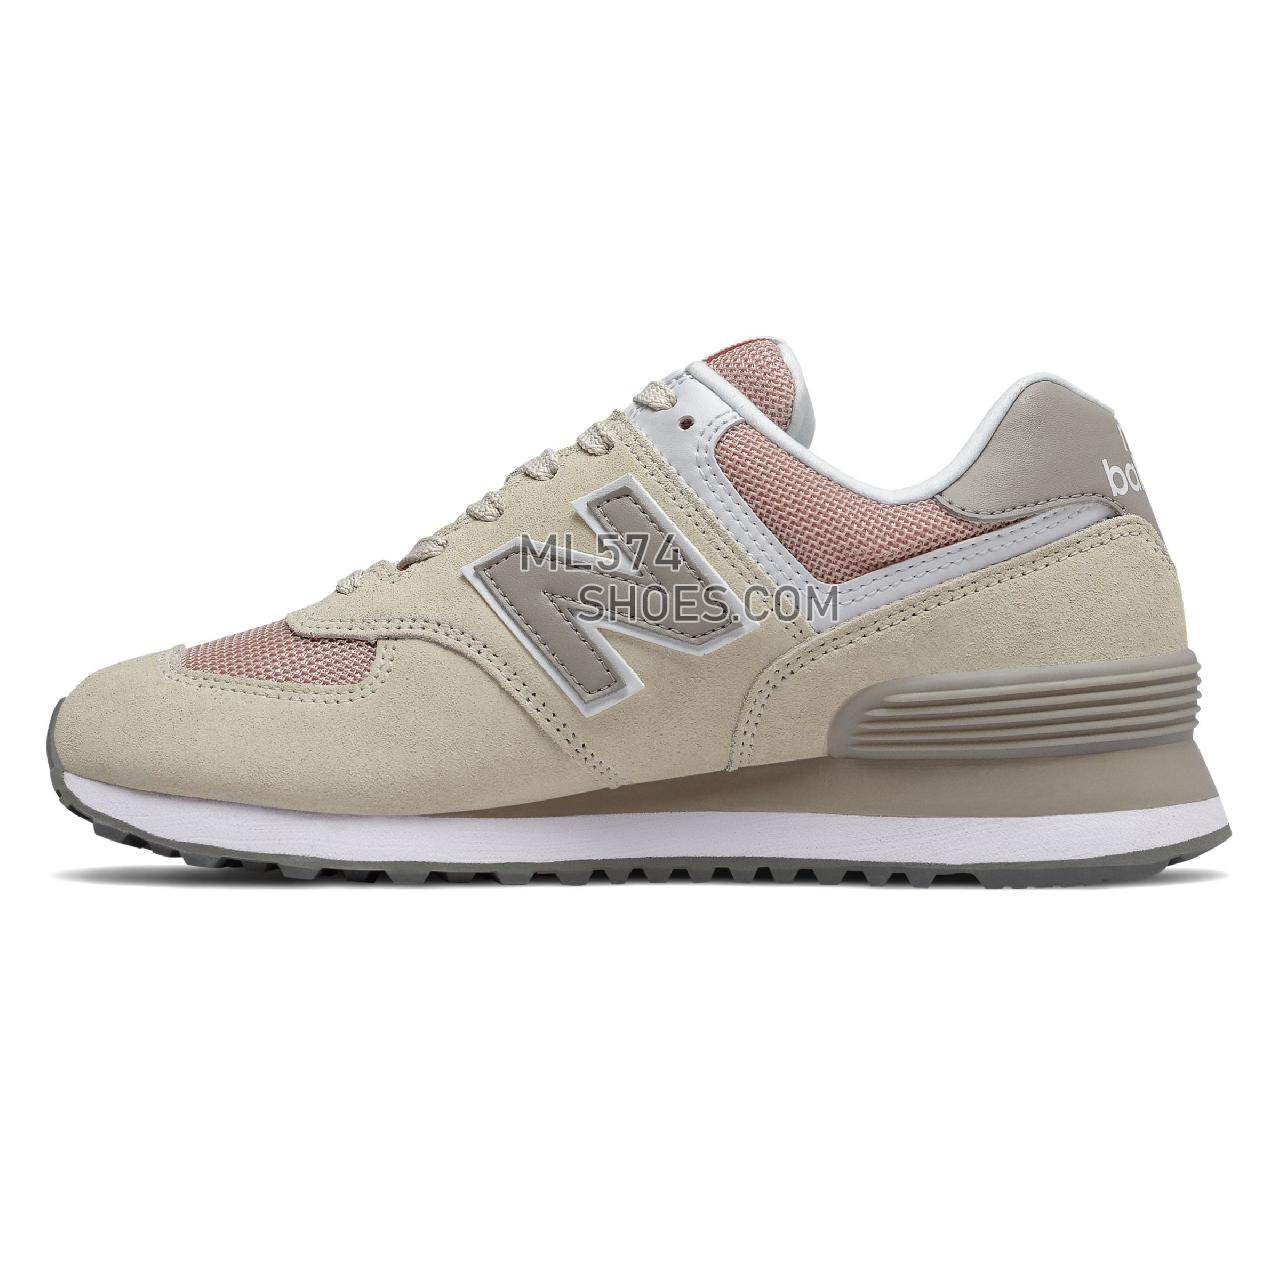 New Balance 574 - Women's Classic Sneakers - Oyster with Oxygen Pink - WL574WNA